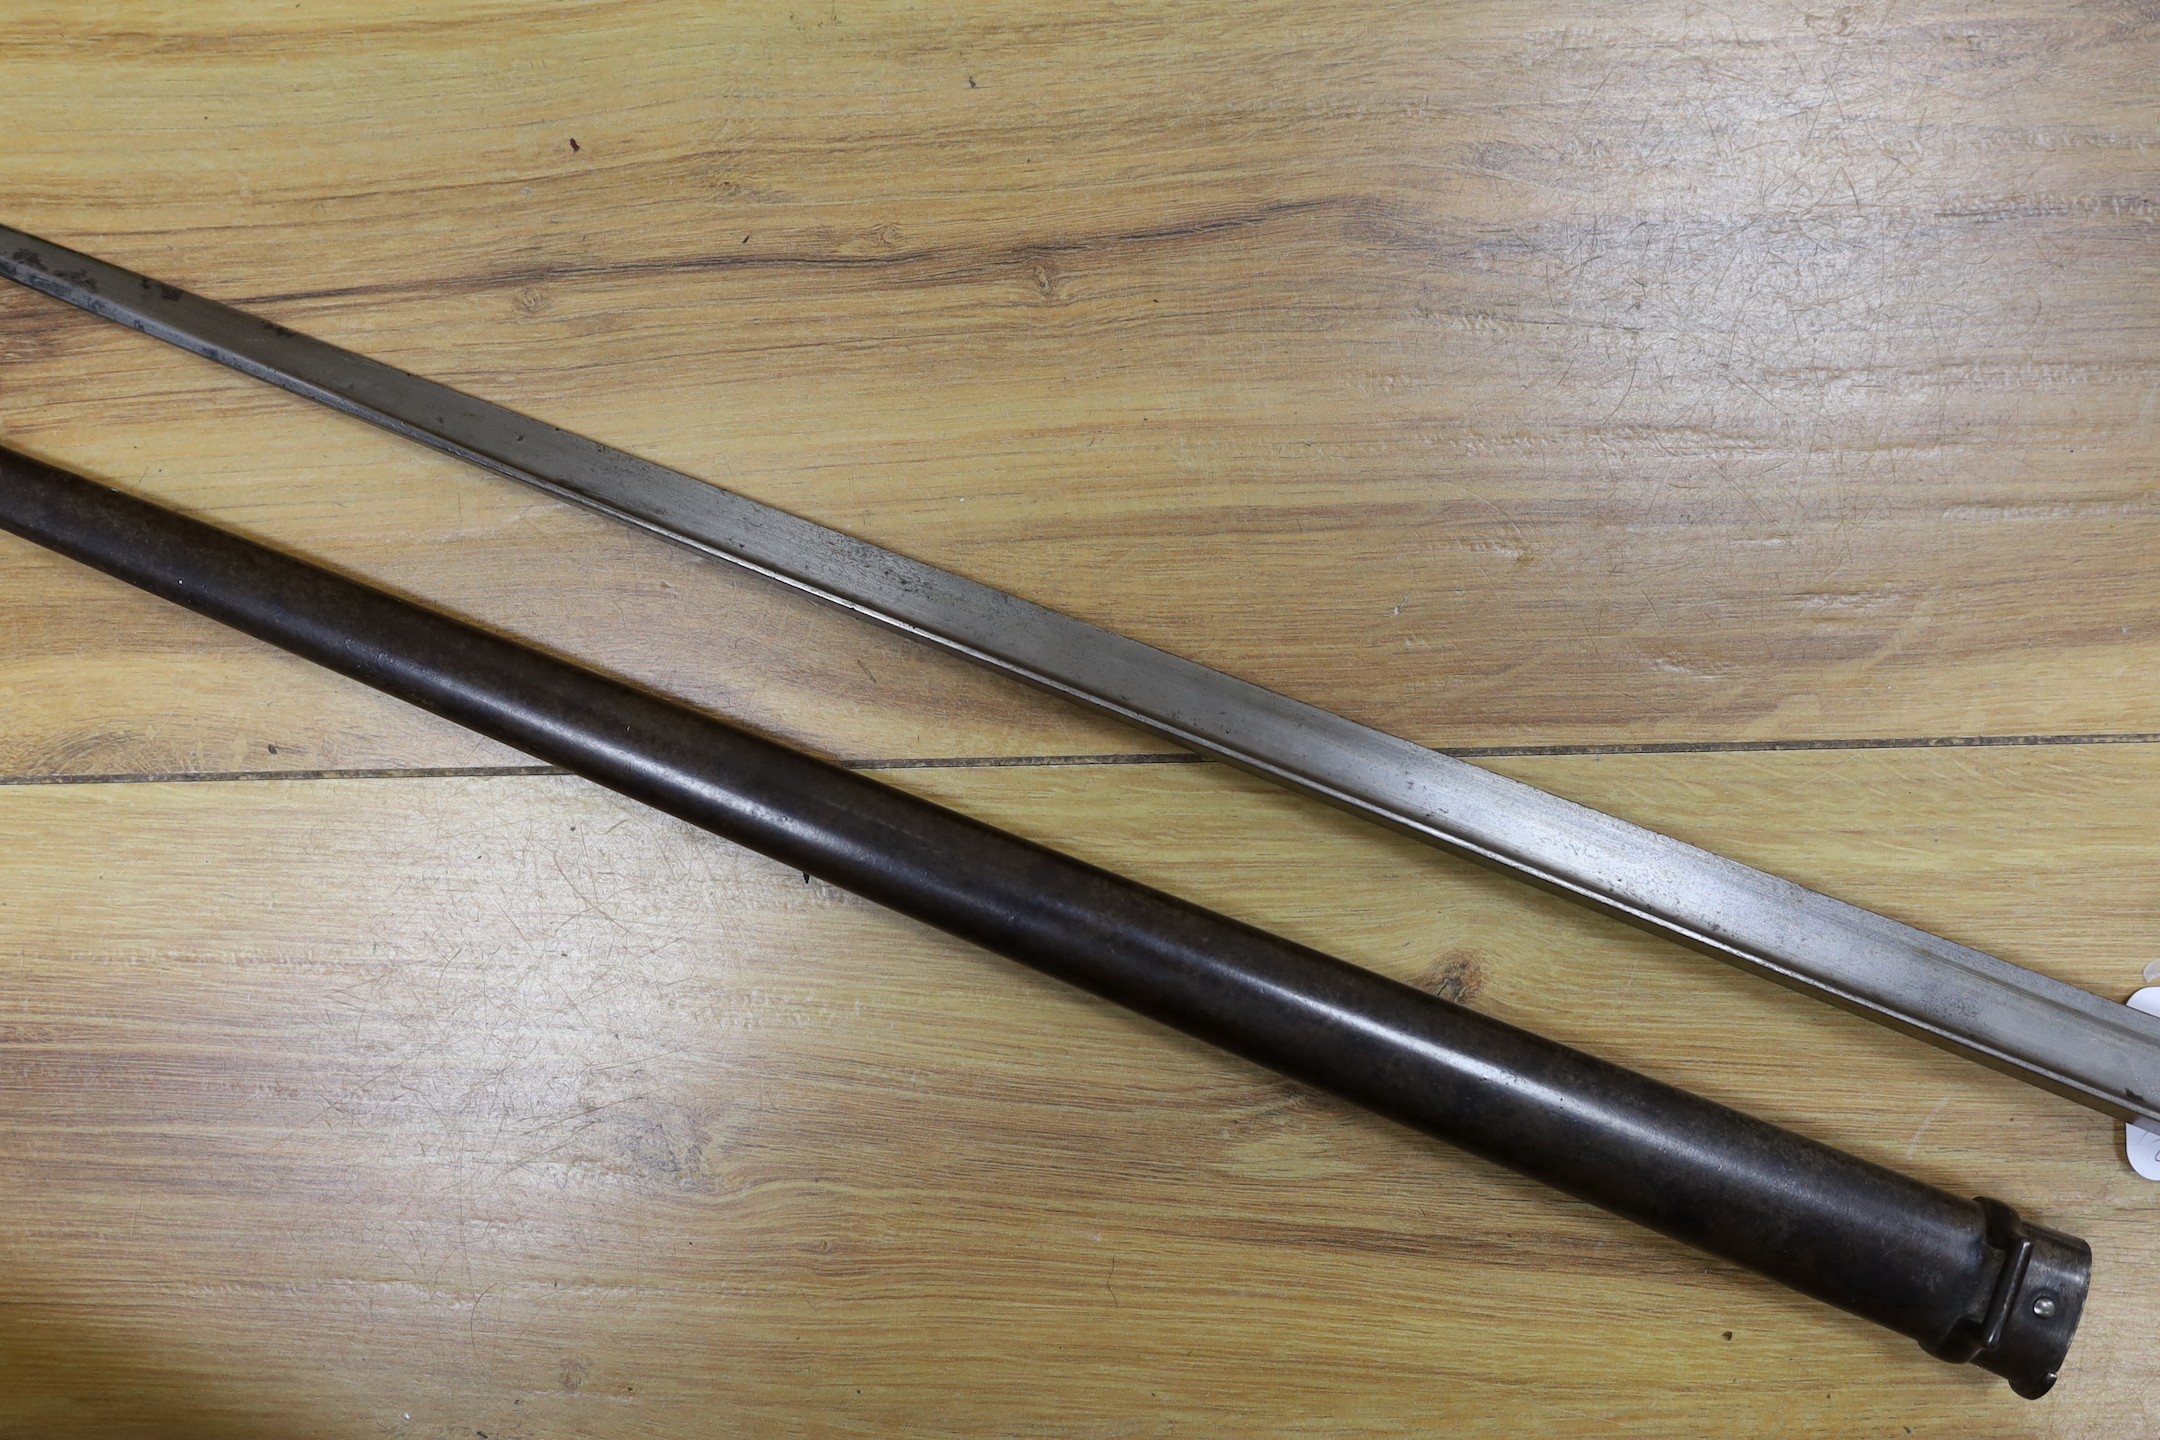 A Victorian officer's sword, lacking sheath, together with a 19th century French ’1877’ bayonet and sheath